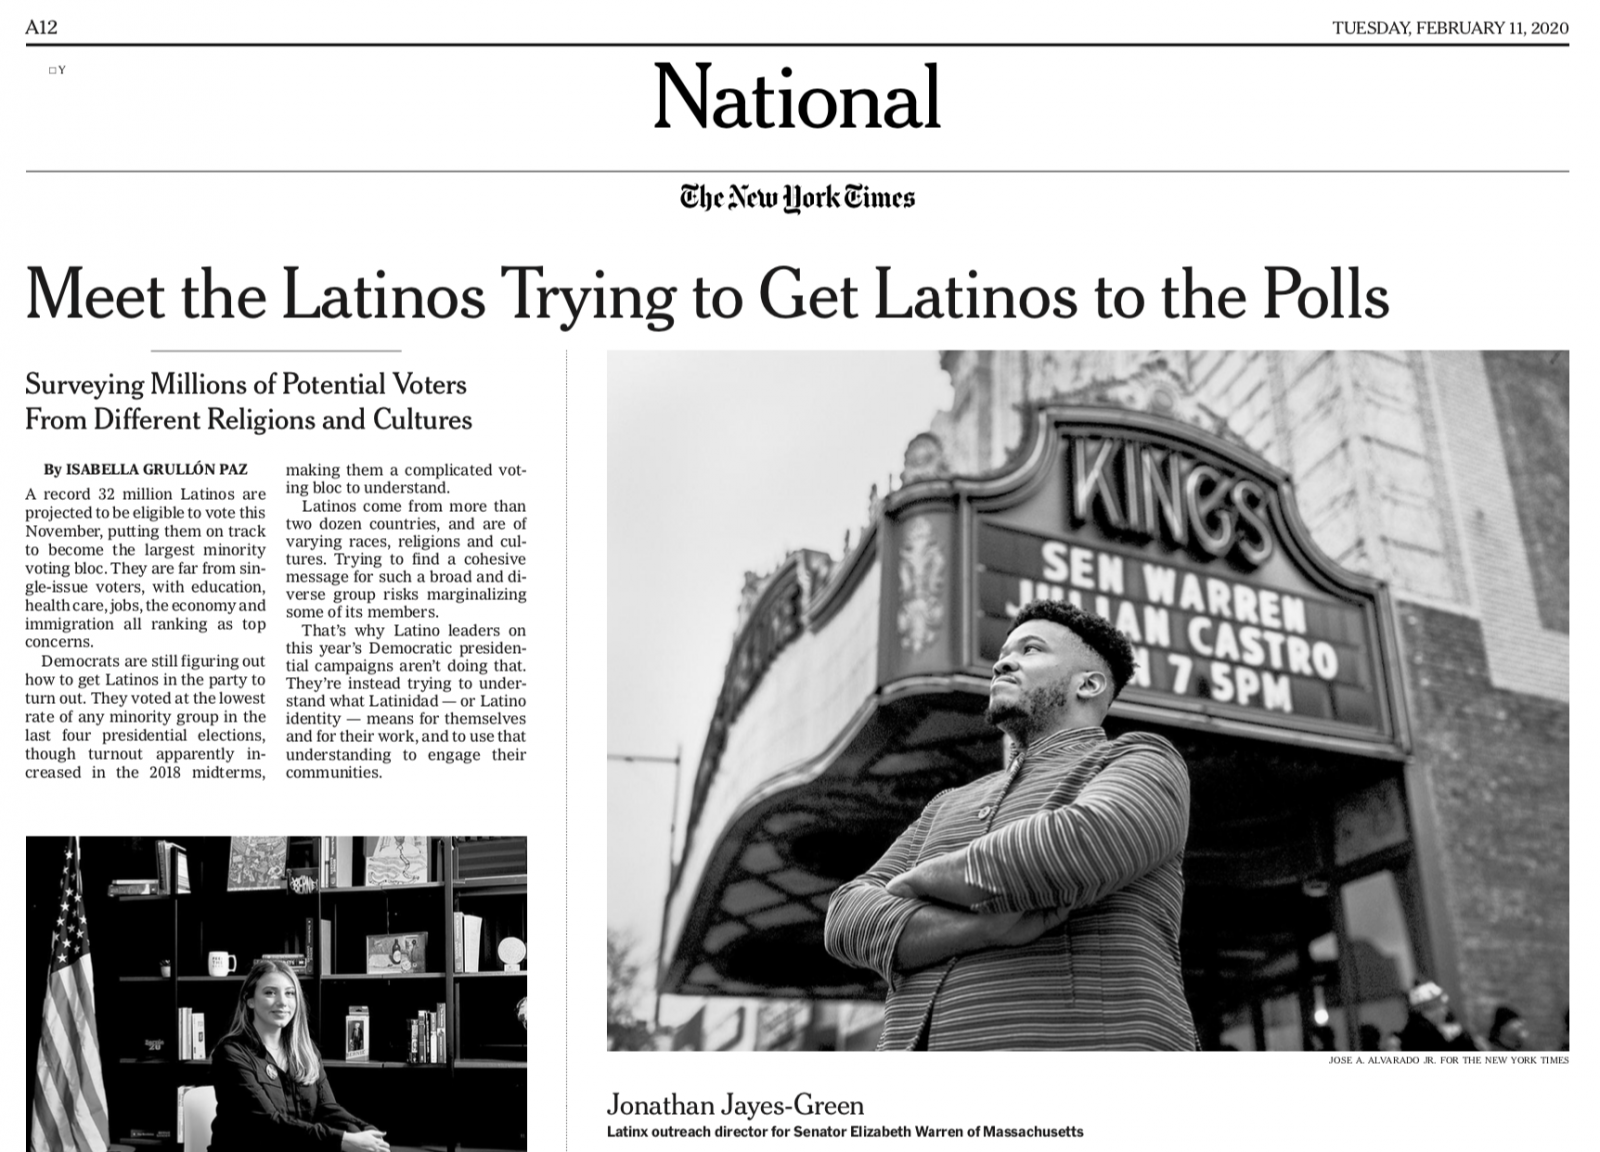 for The New York Times: Meet the Latinos Trying to Get Latinos to the Polls